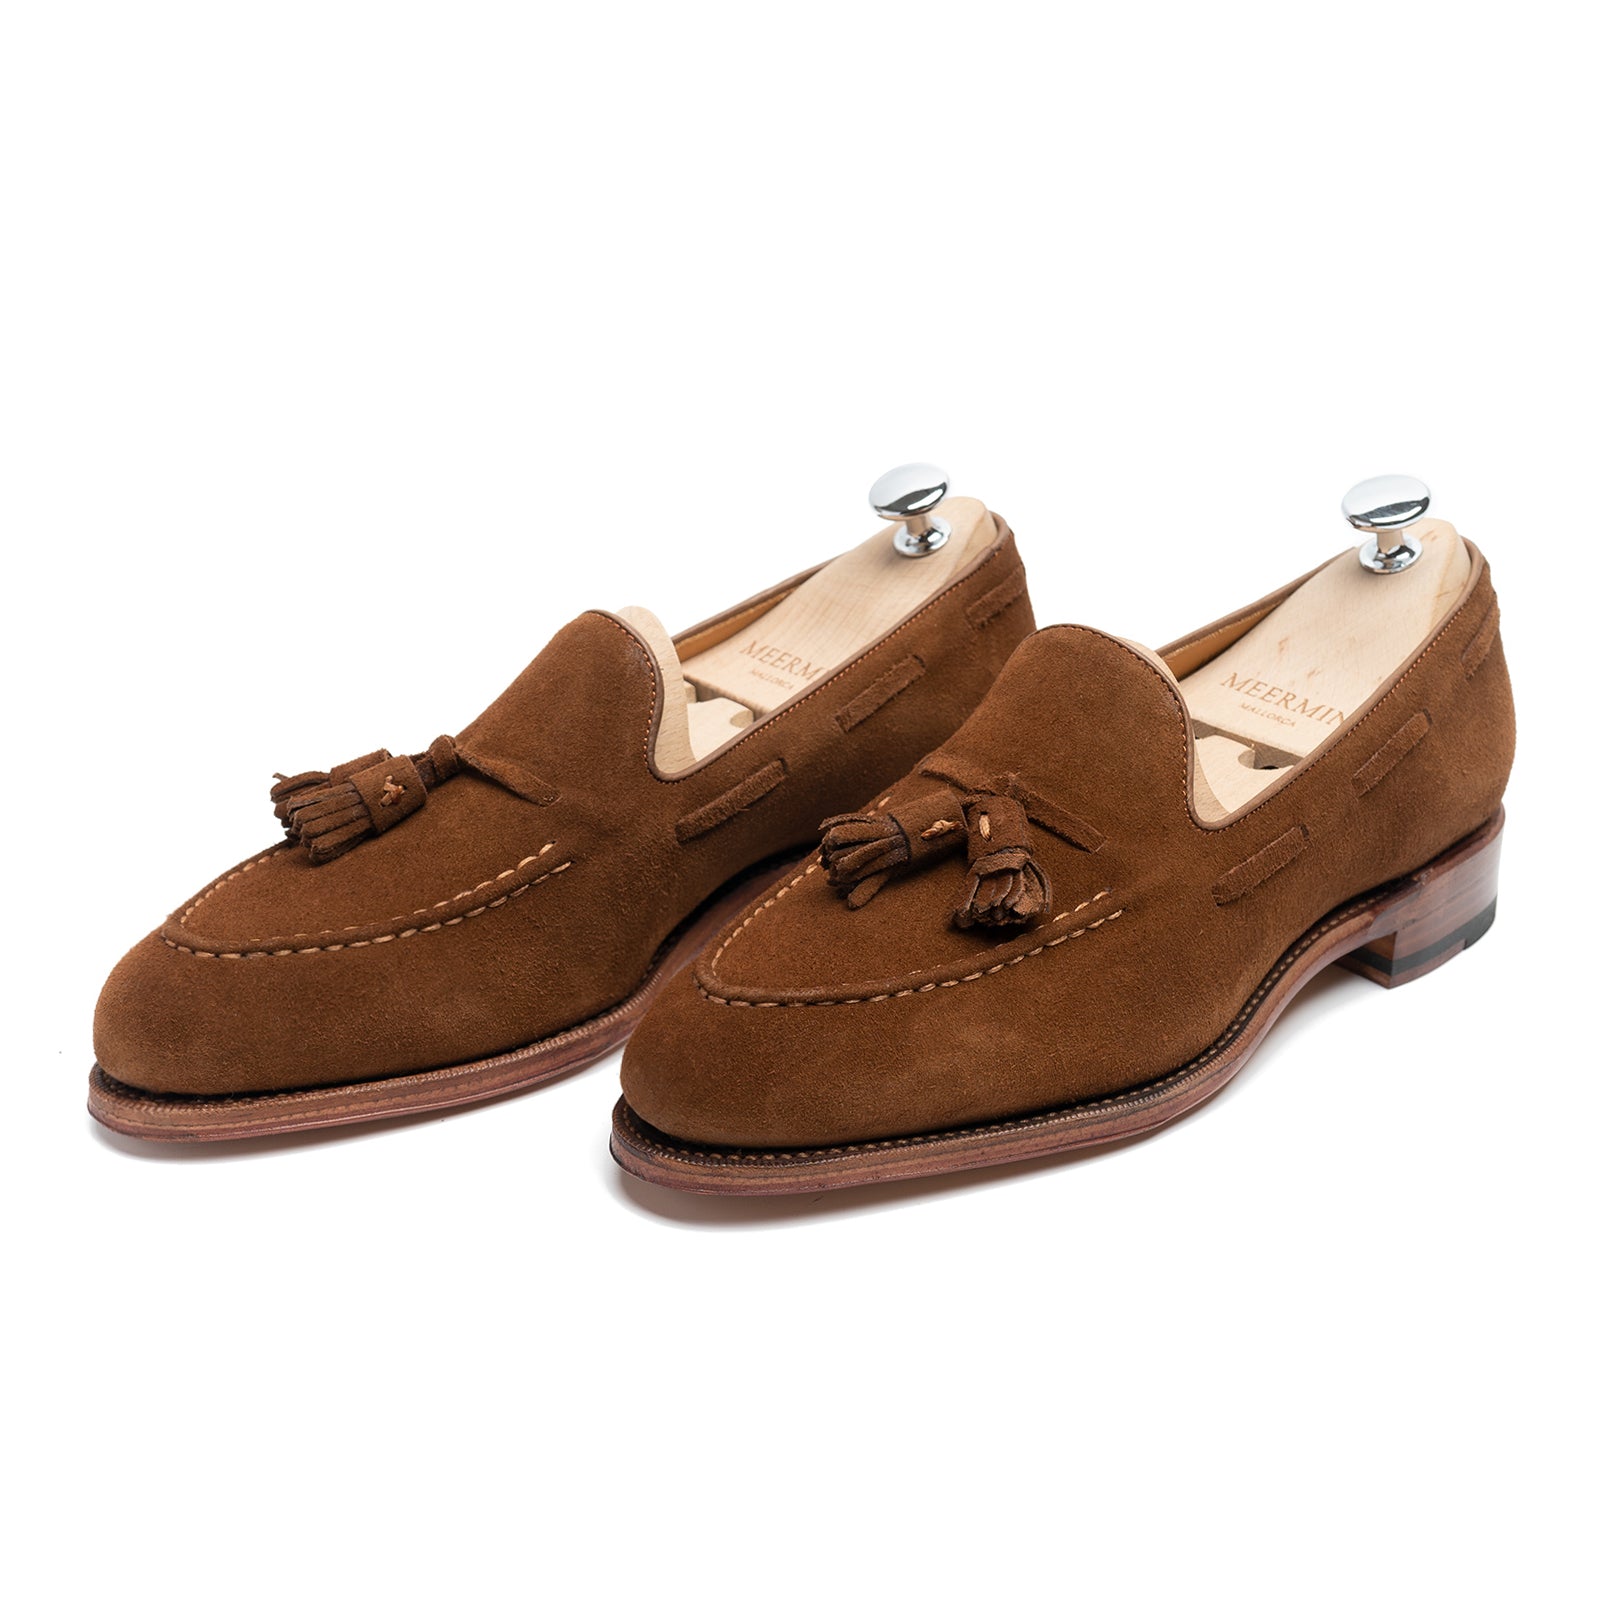 101412 - SNUFF SUEDE - E – Meermin Shoes